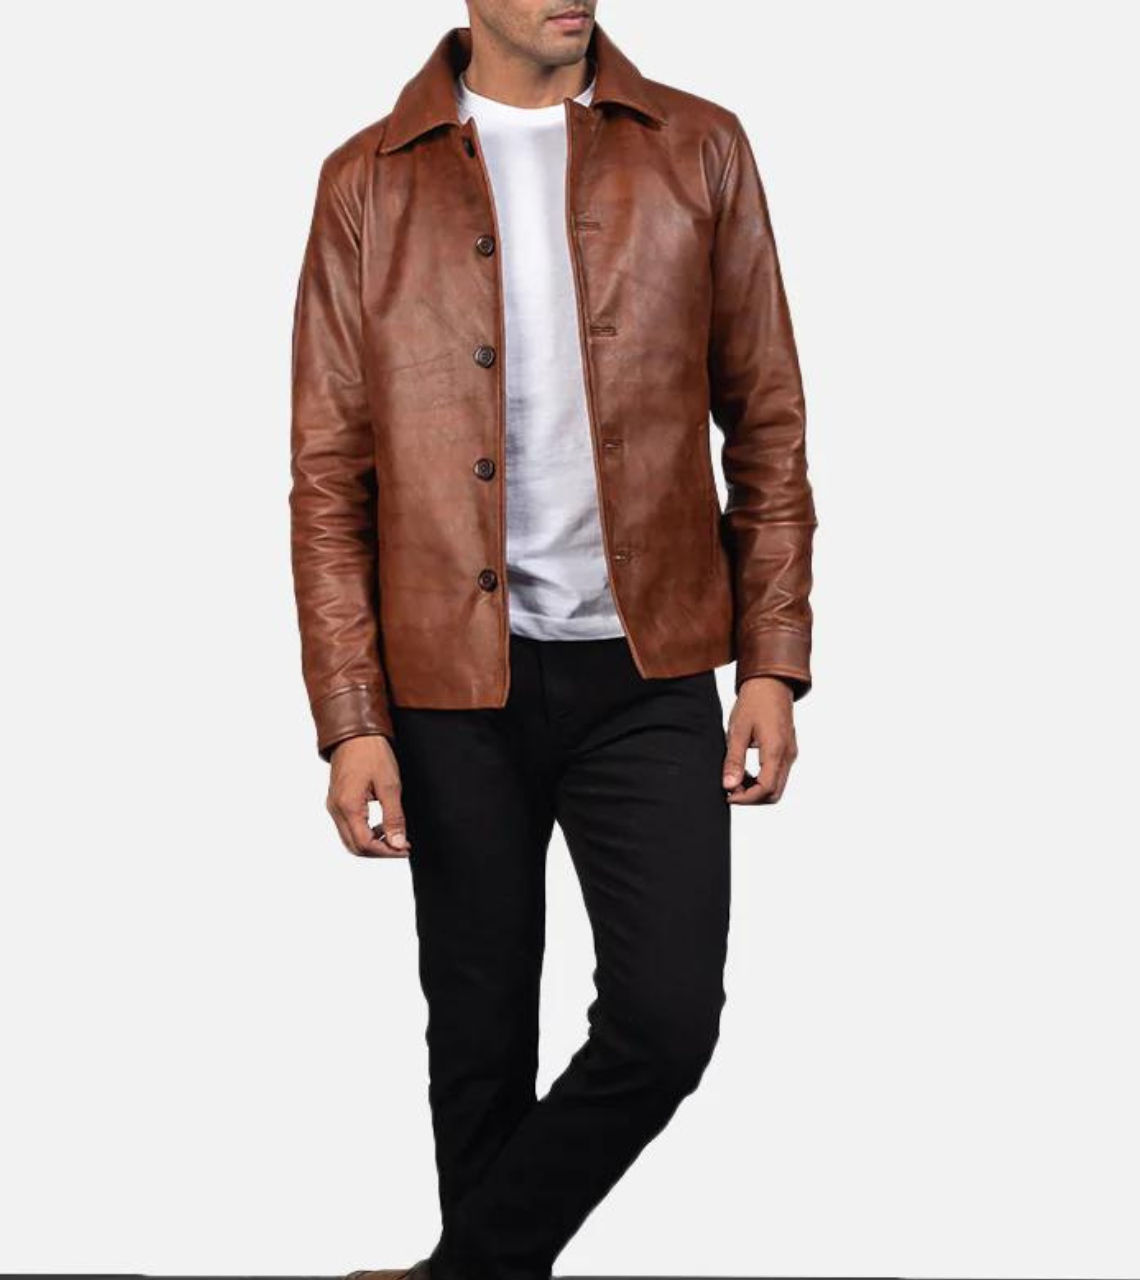 Distressed Leather Jacket For Men's